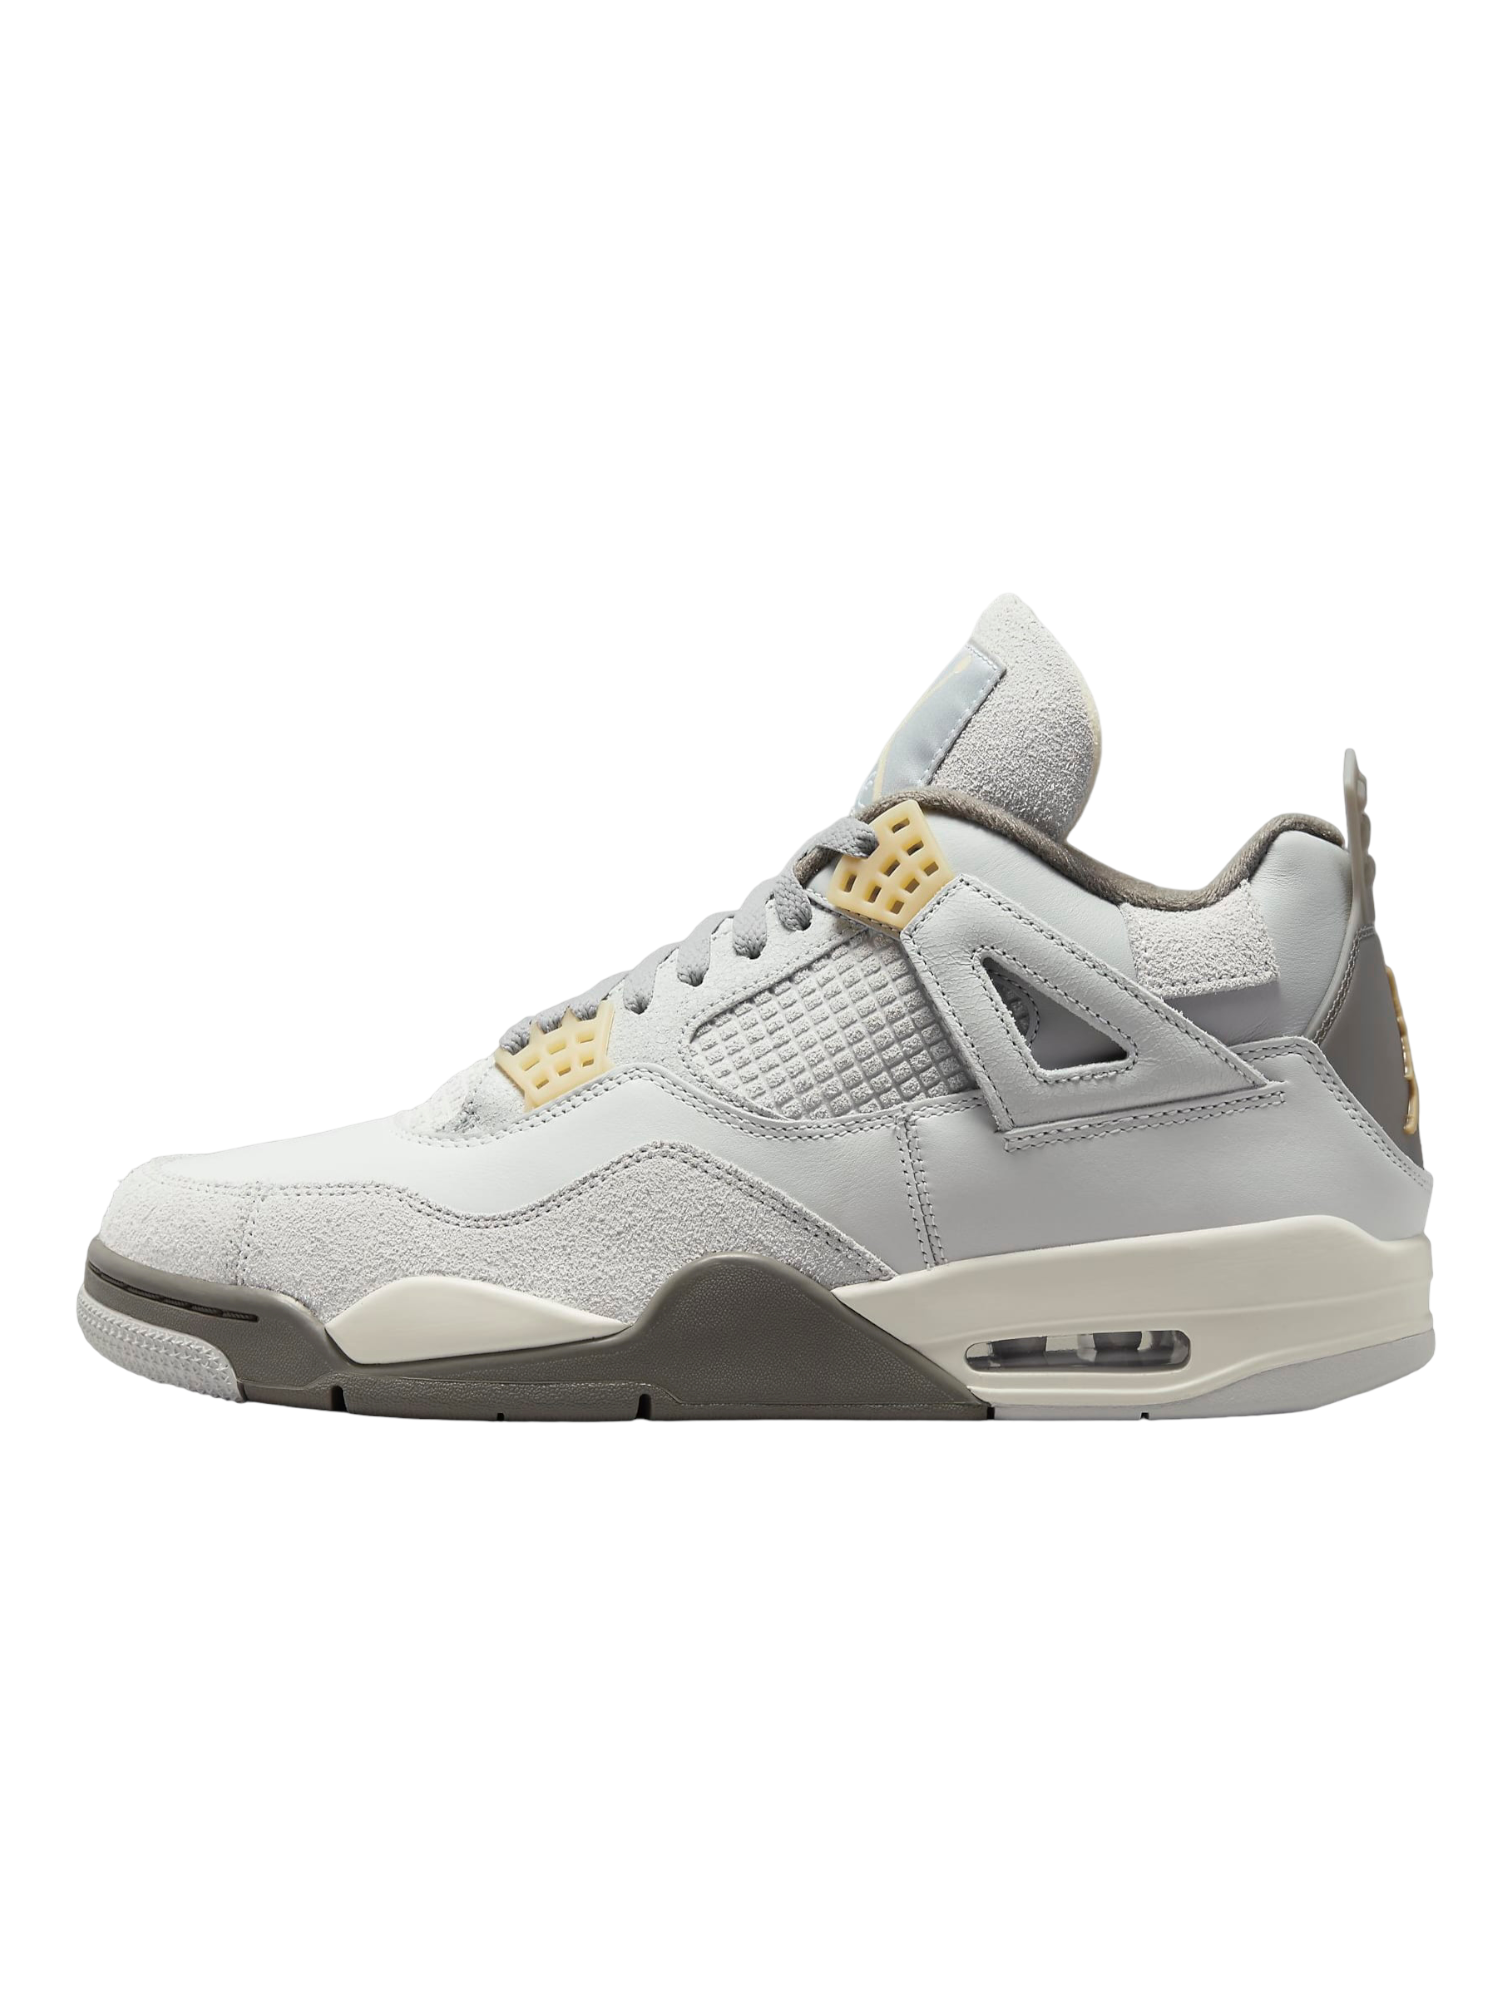 Jordan 4 Retro SE Craft Photon Dust Sneakers - Genuine Design luxury consignment Calgary, Alberta, Canada New and pre-owned clothing, shoes, accessories.